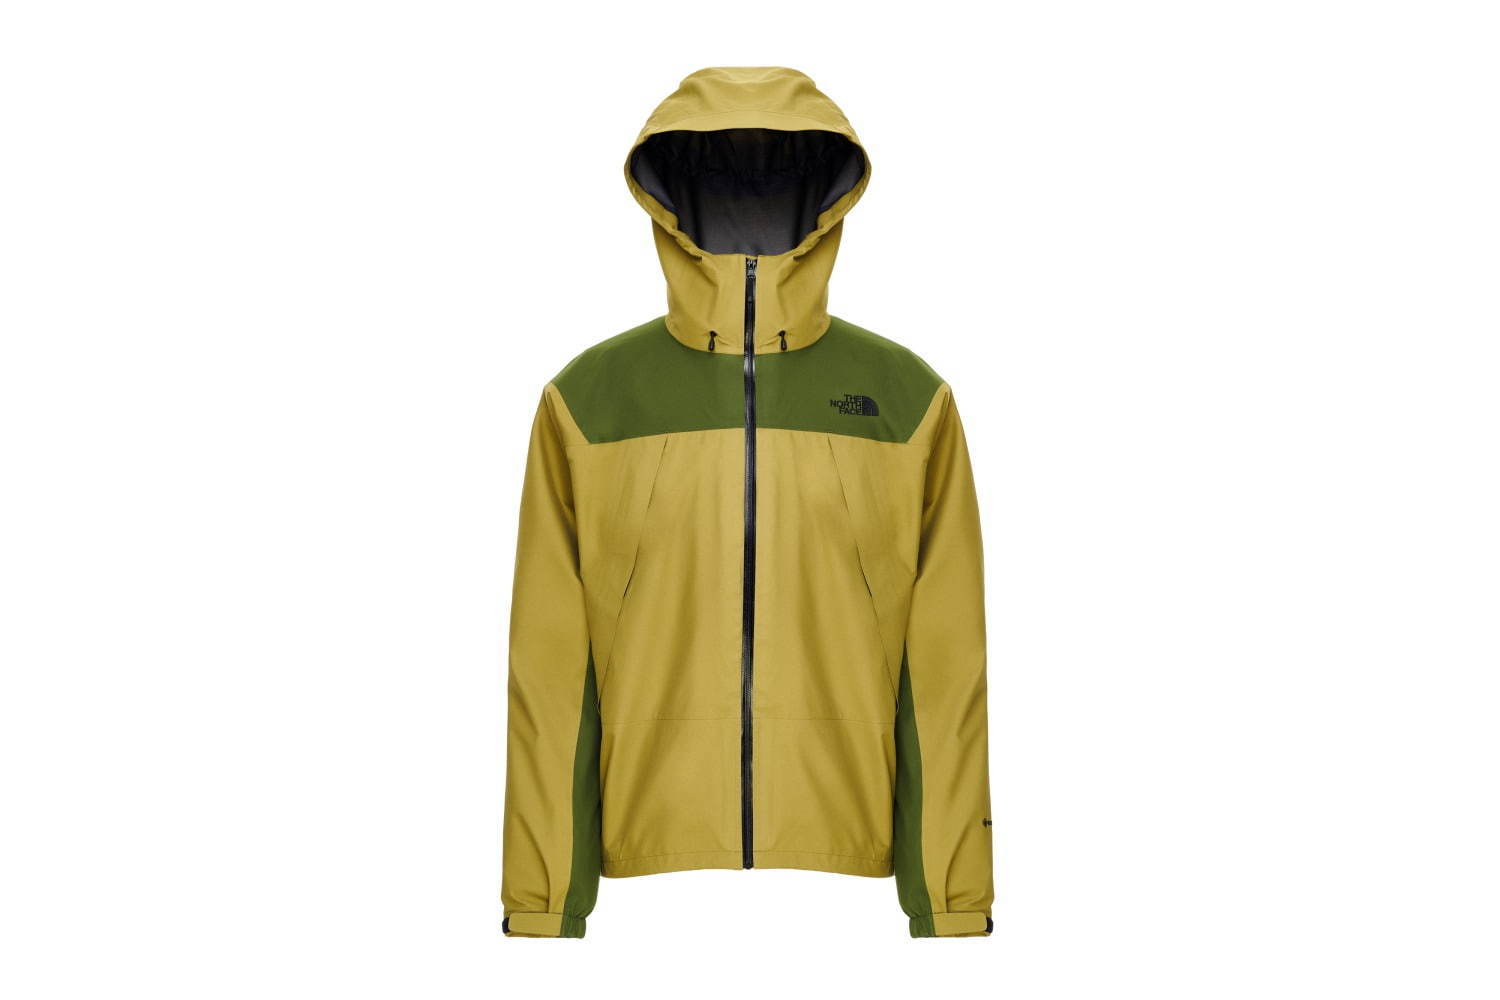 THE NORTH FACE - ② THE NORTH FACEの+stbp.com.br